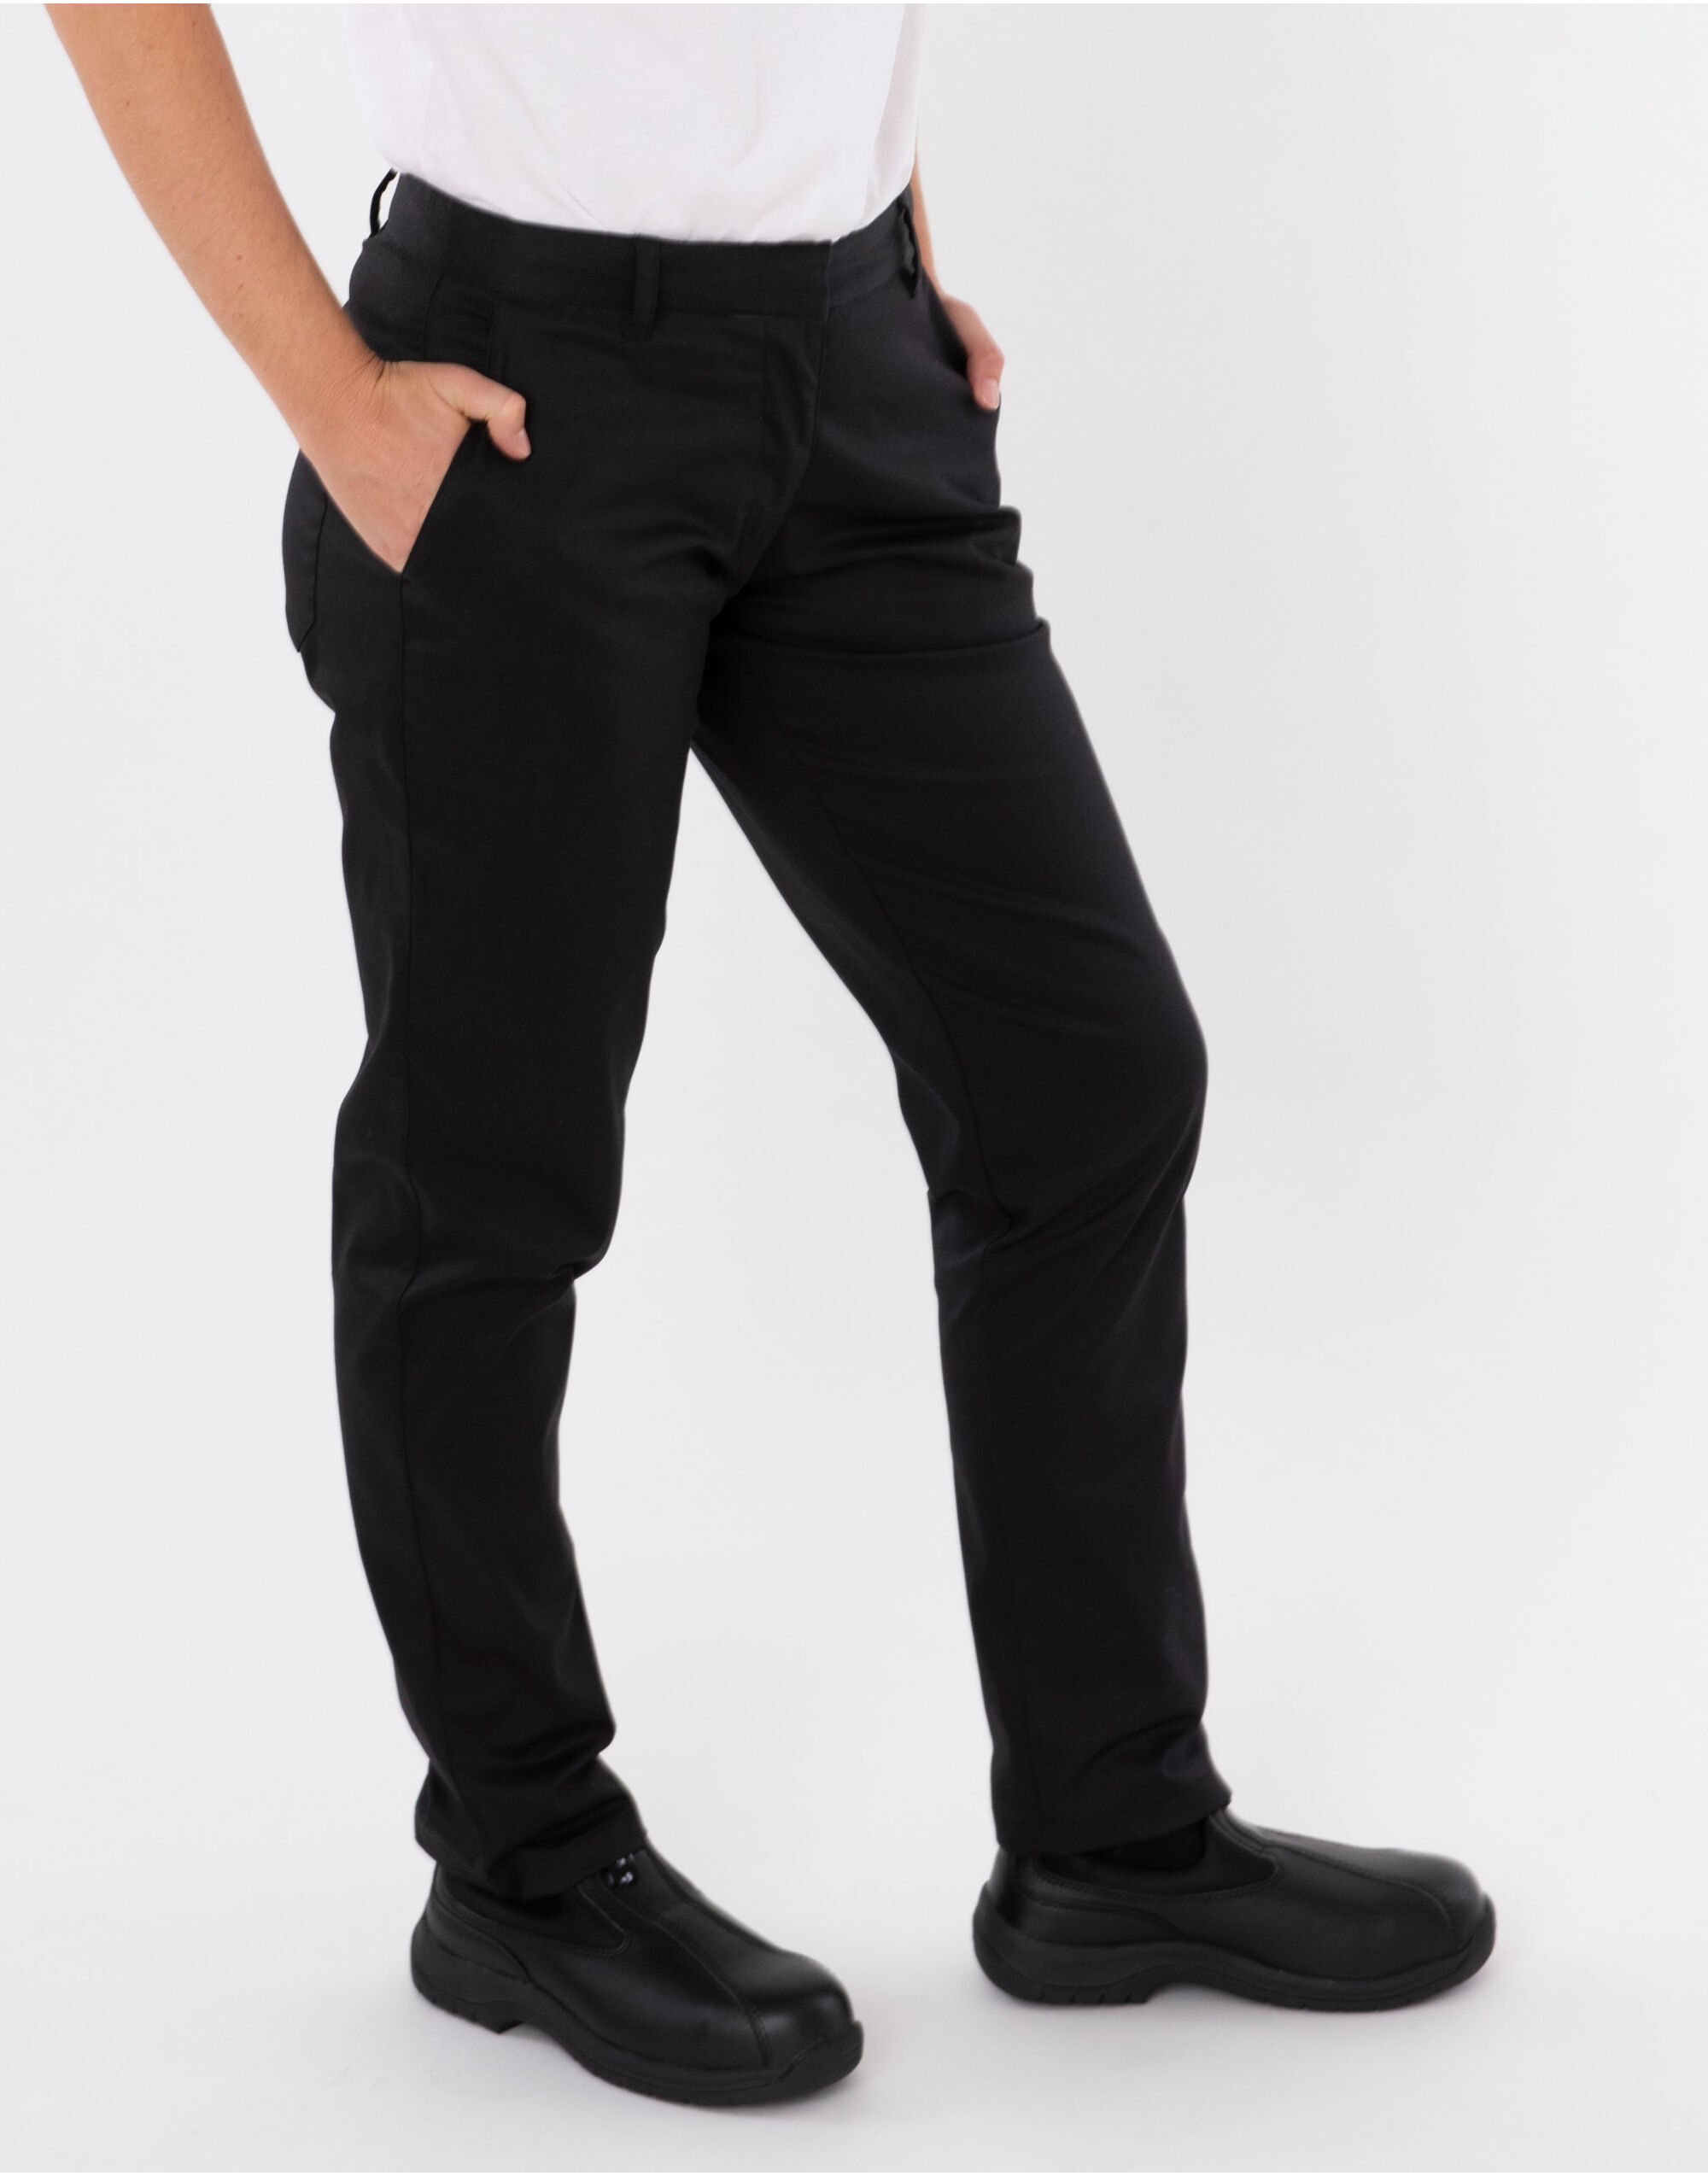 AFD Ladies' Stretch Trousers